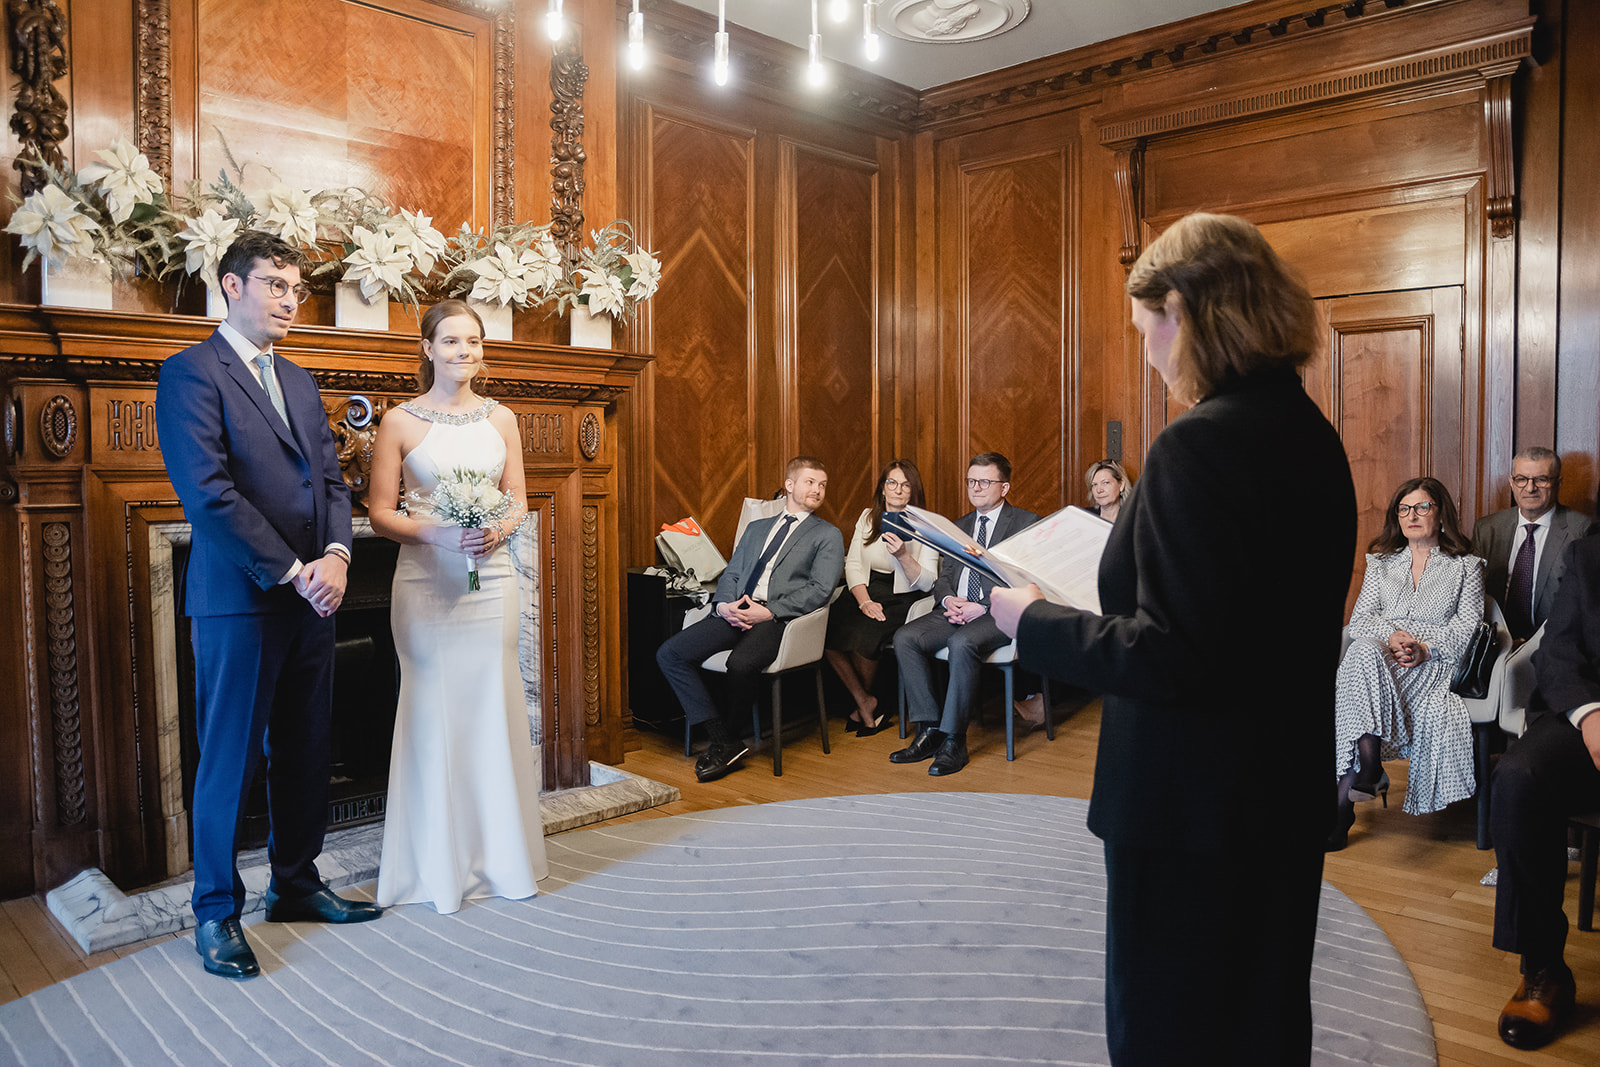 Kinga and Jean-Marc Wedding ceremony in the Marylebone Room at The Old Marylebone Town Hall